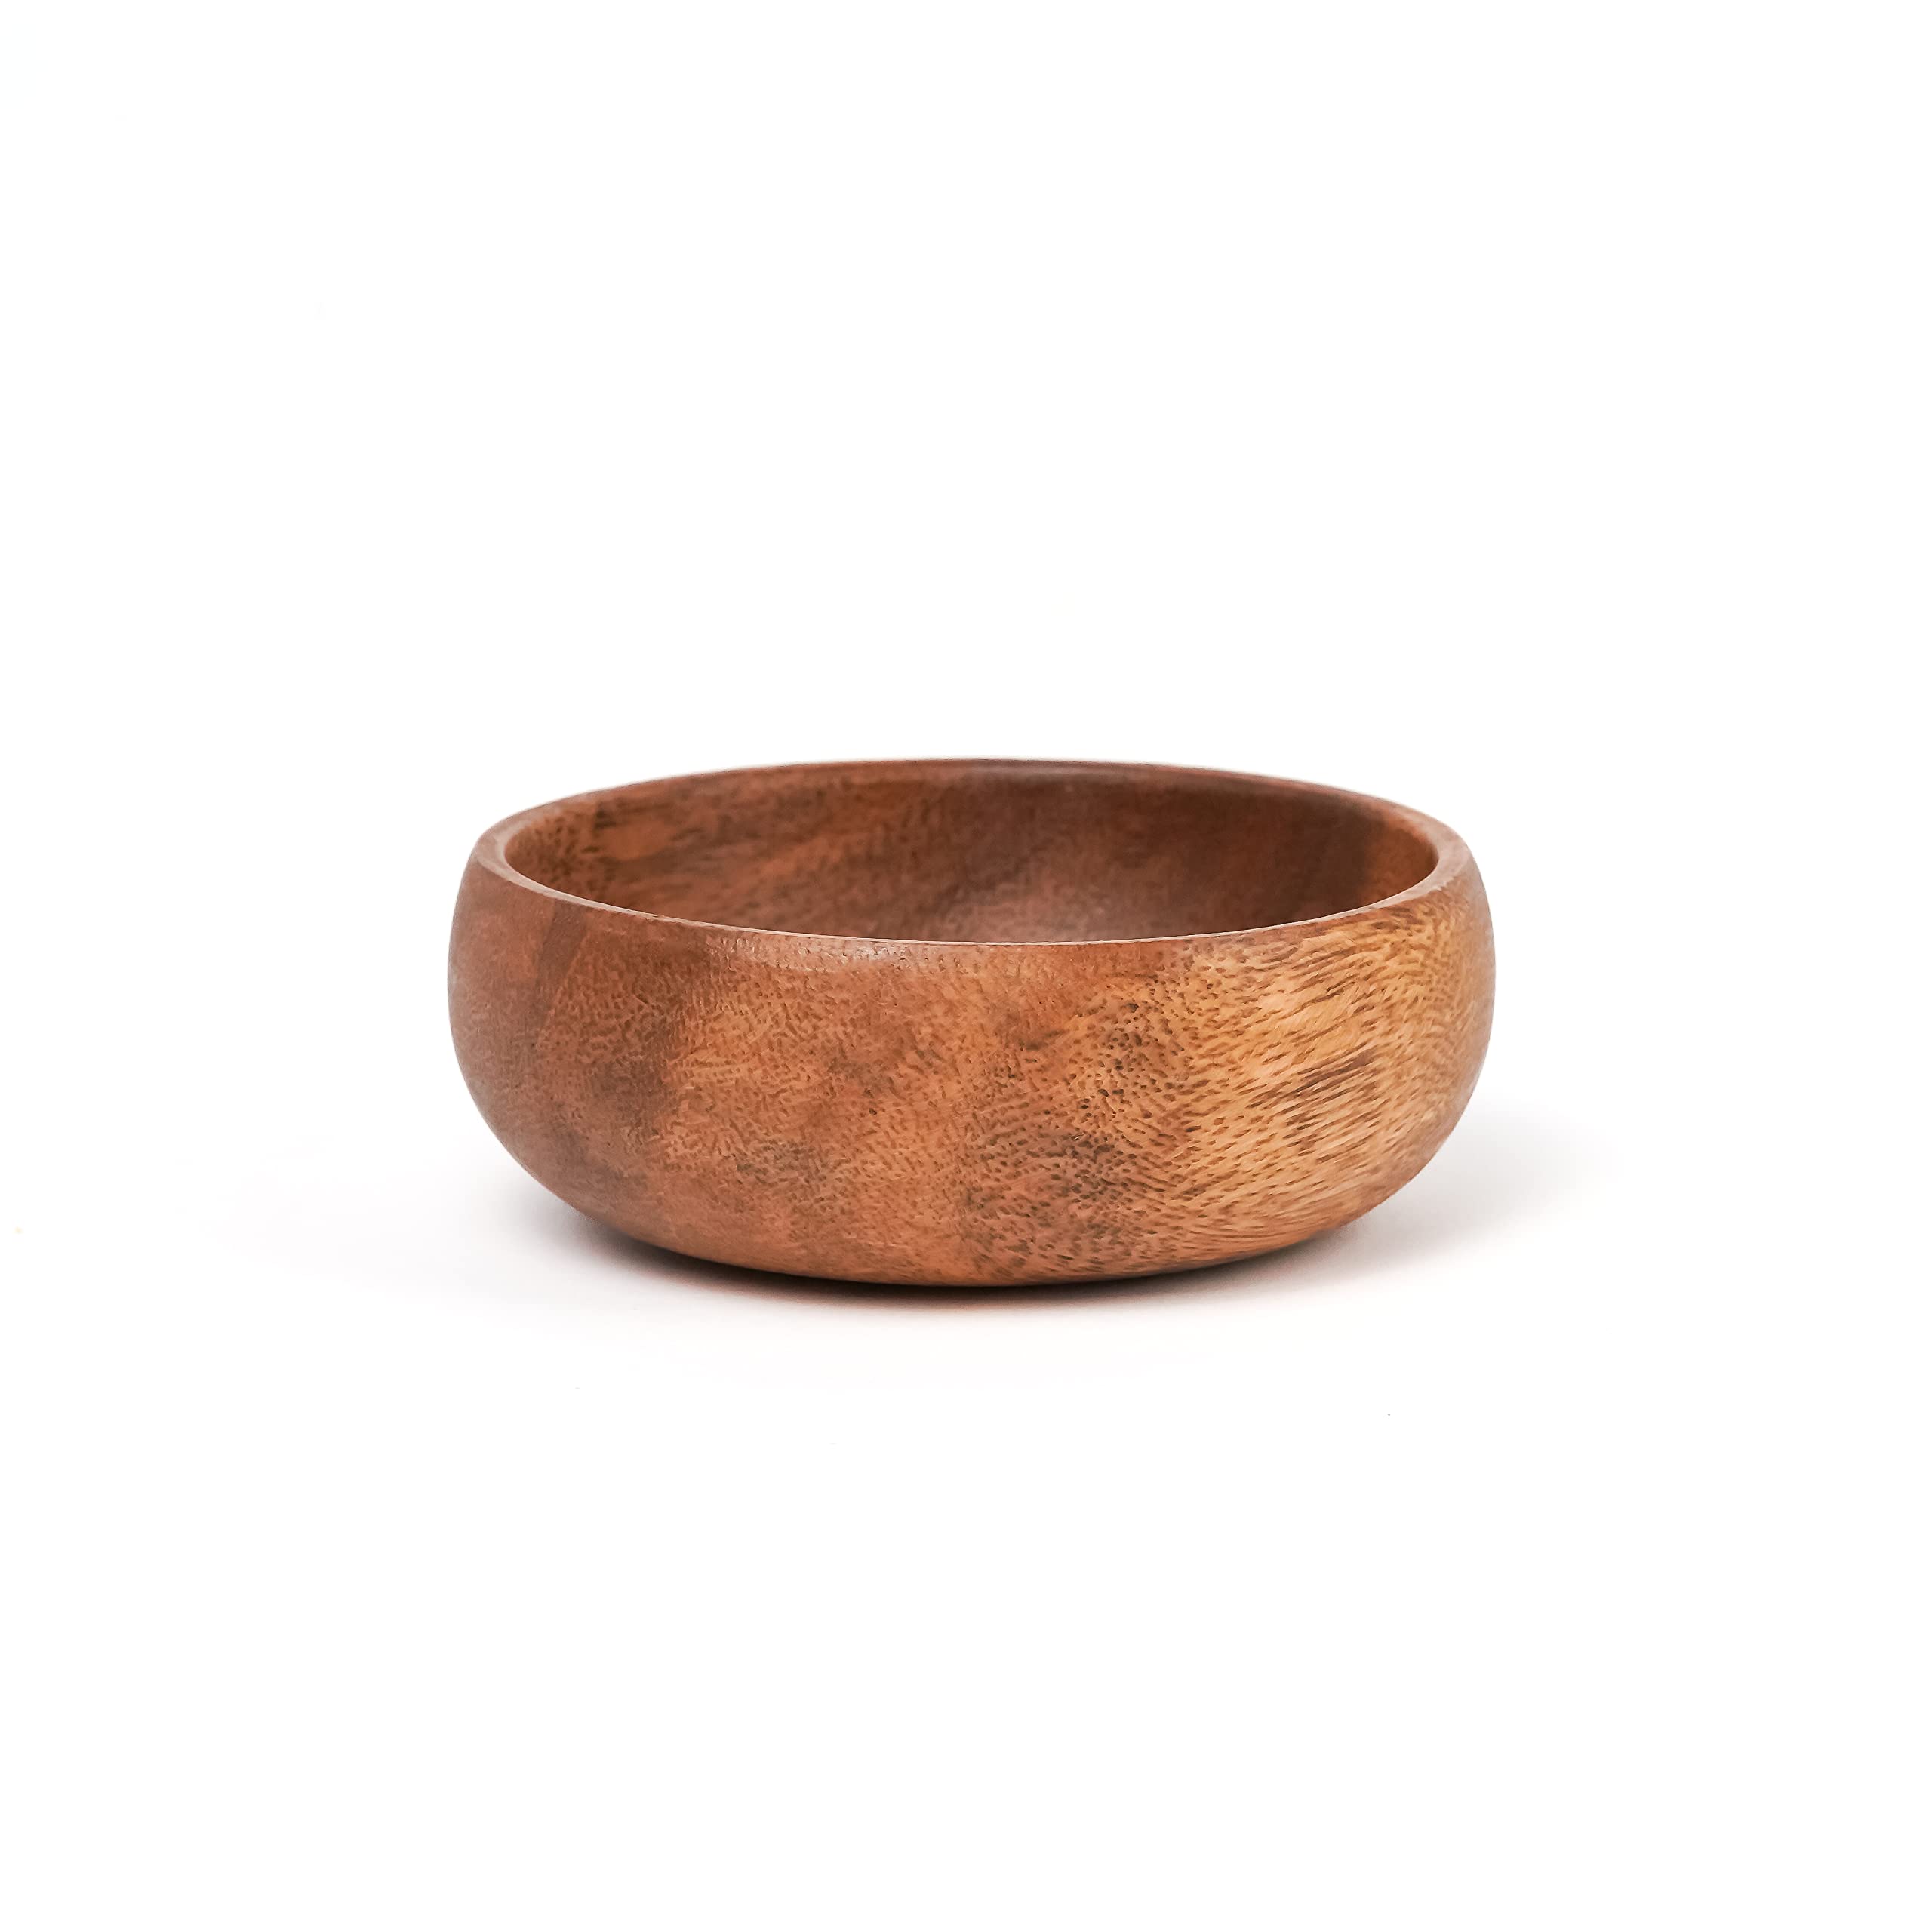 Casa/Legno Authentic Handcrafted Wooden Bowls Set - Exquisite Filipino Craftsmanship for Nuts and Acai Bowls - 4